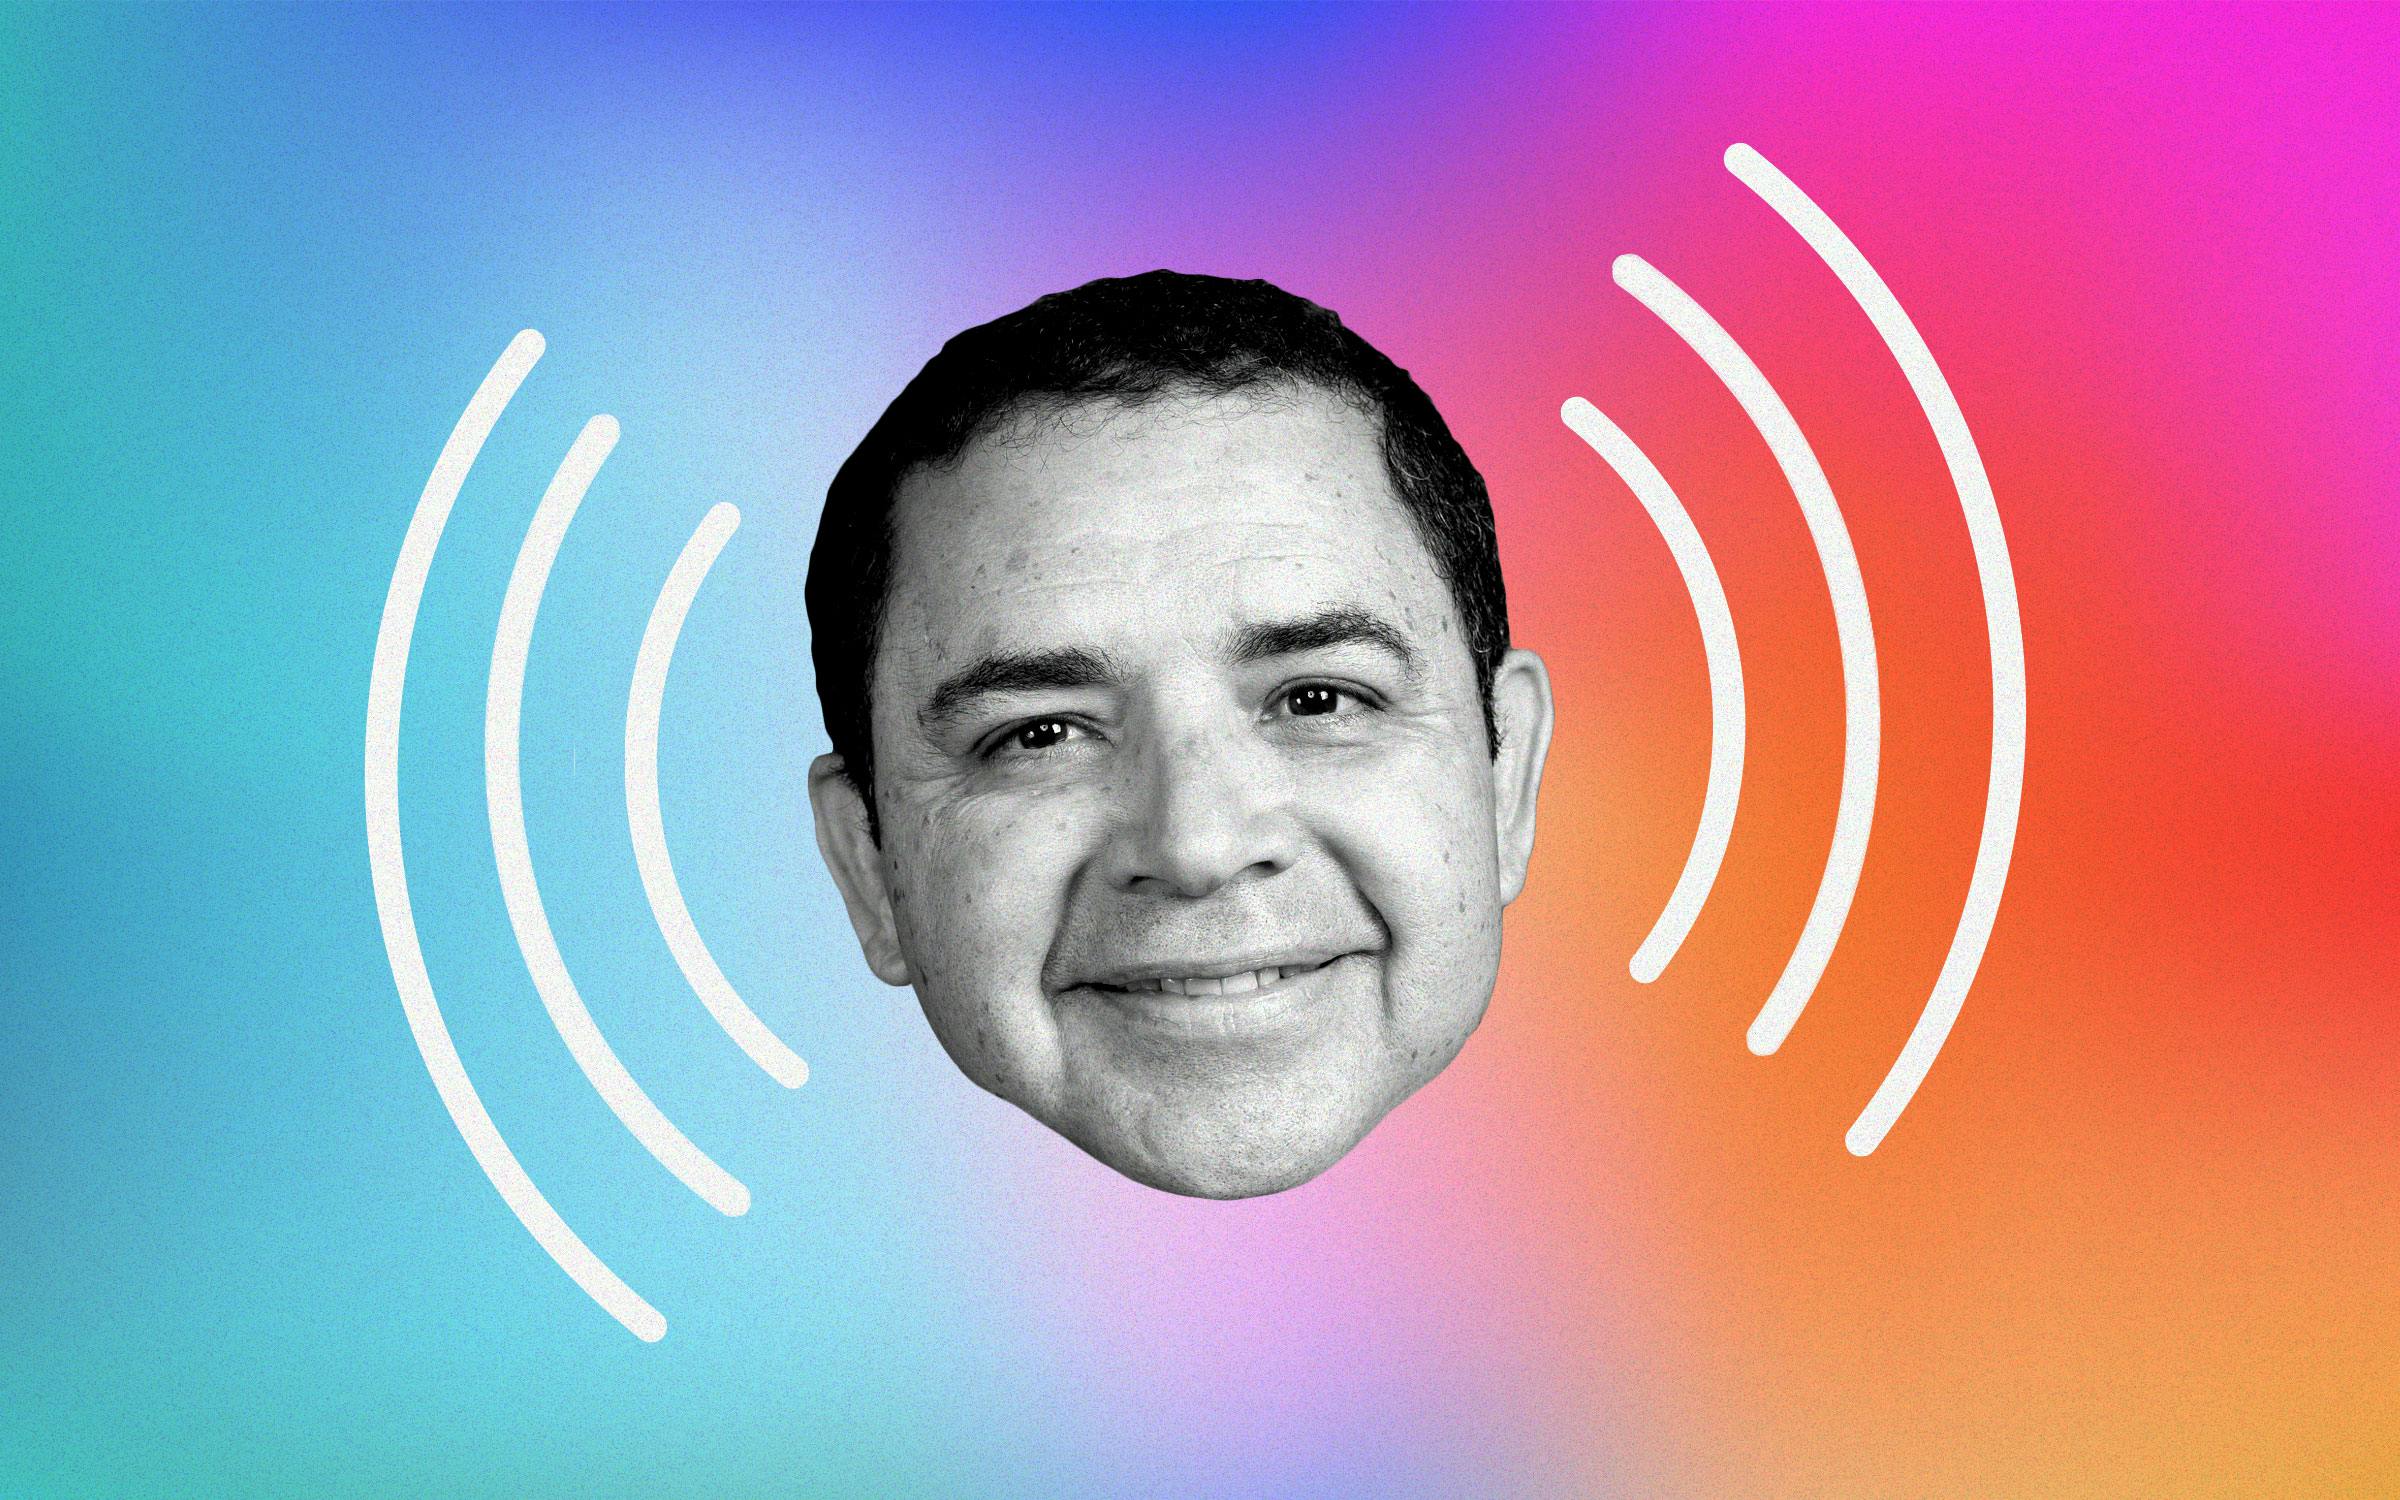 Henry Cuellar Wouldnt Talk About His Indictment. But He Gave Us a Playlist. [Video]